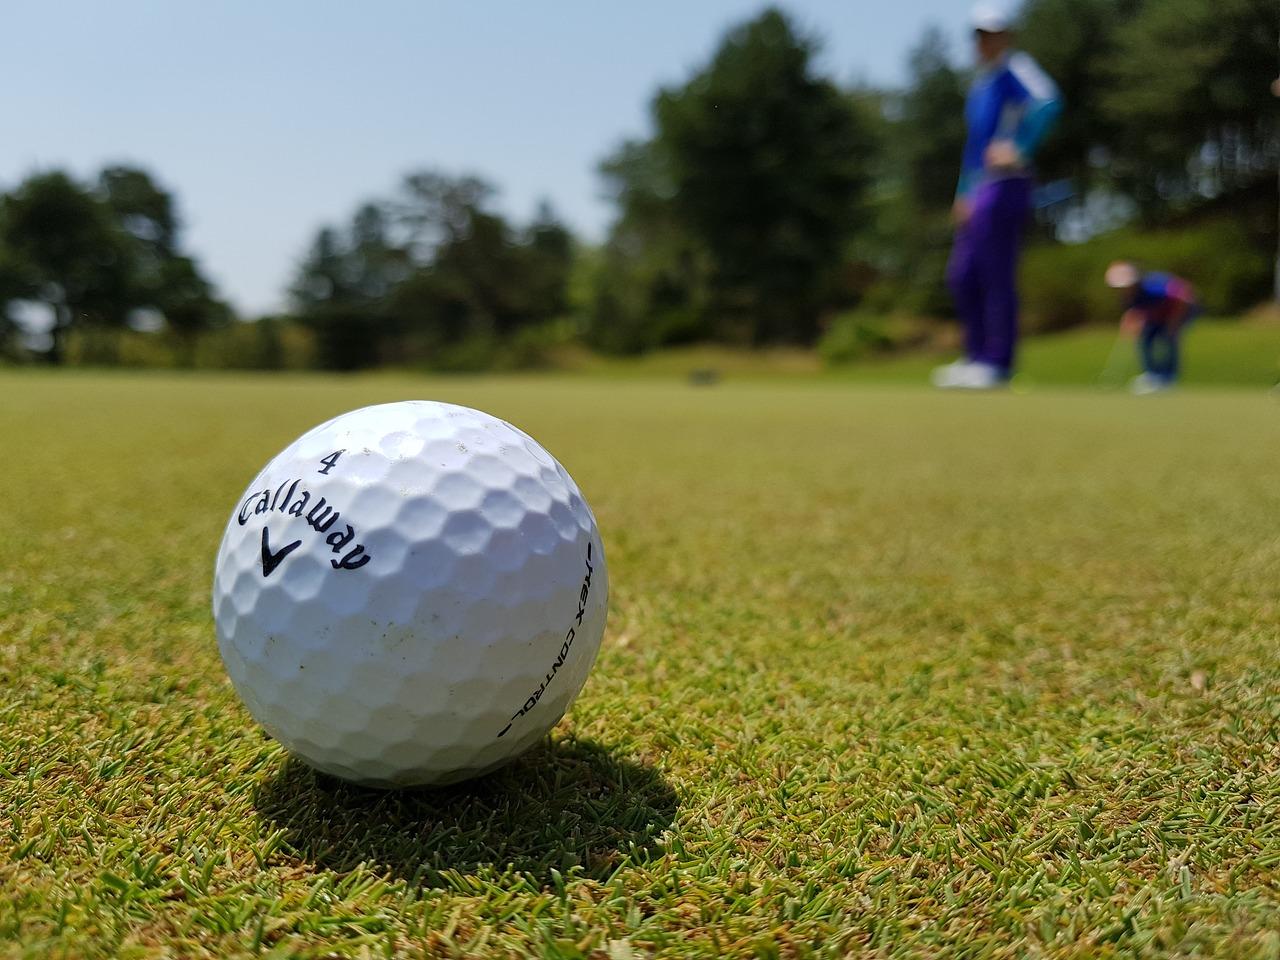 40th annual HGH Foundation Golf Classic on July 6 will support health needs of community